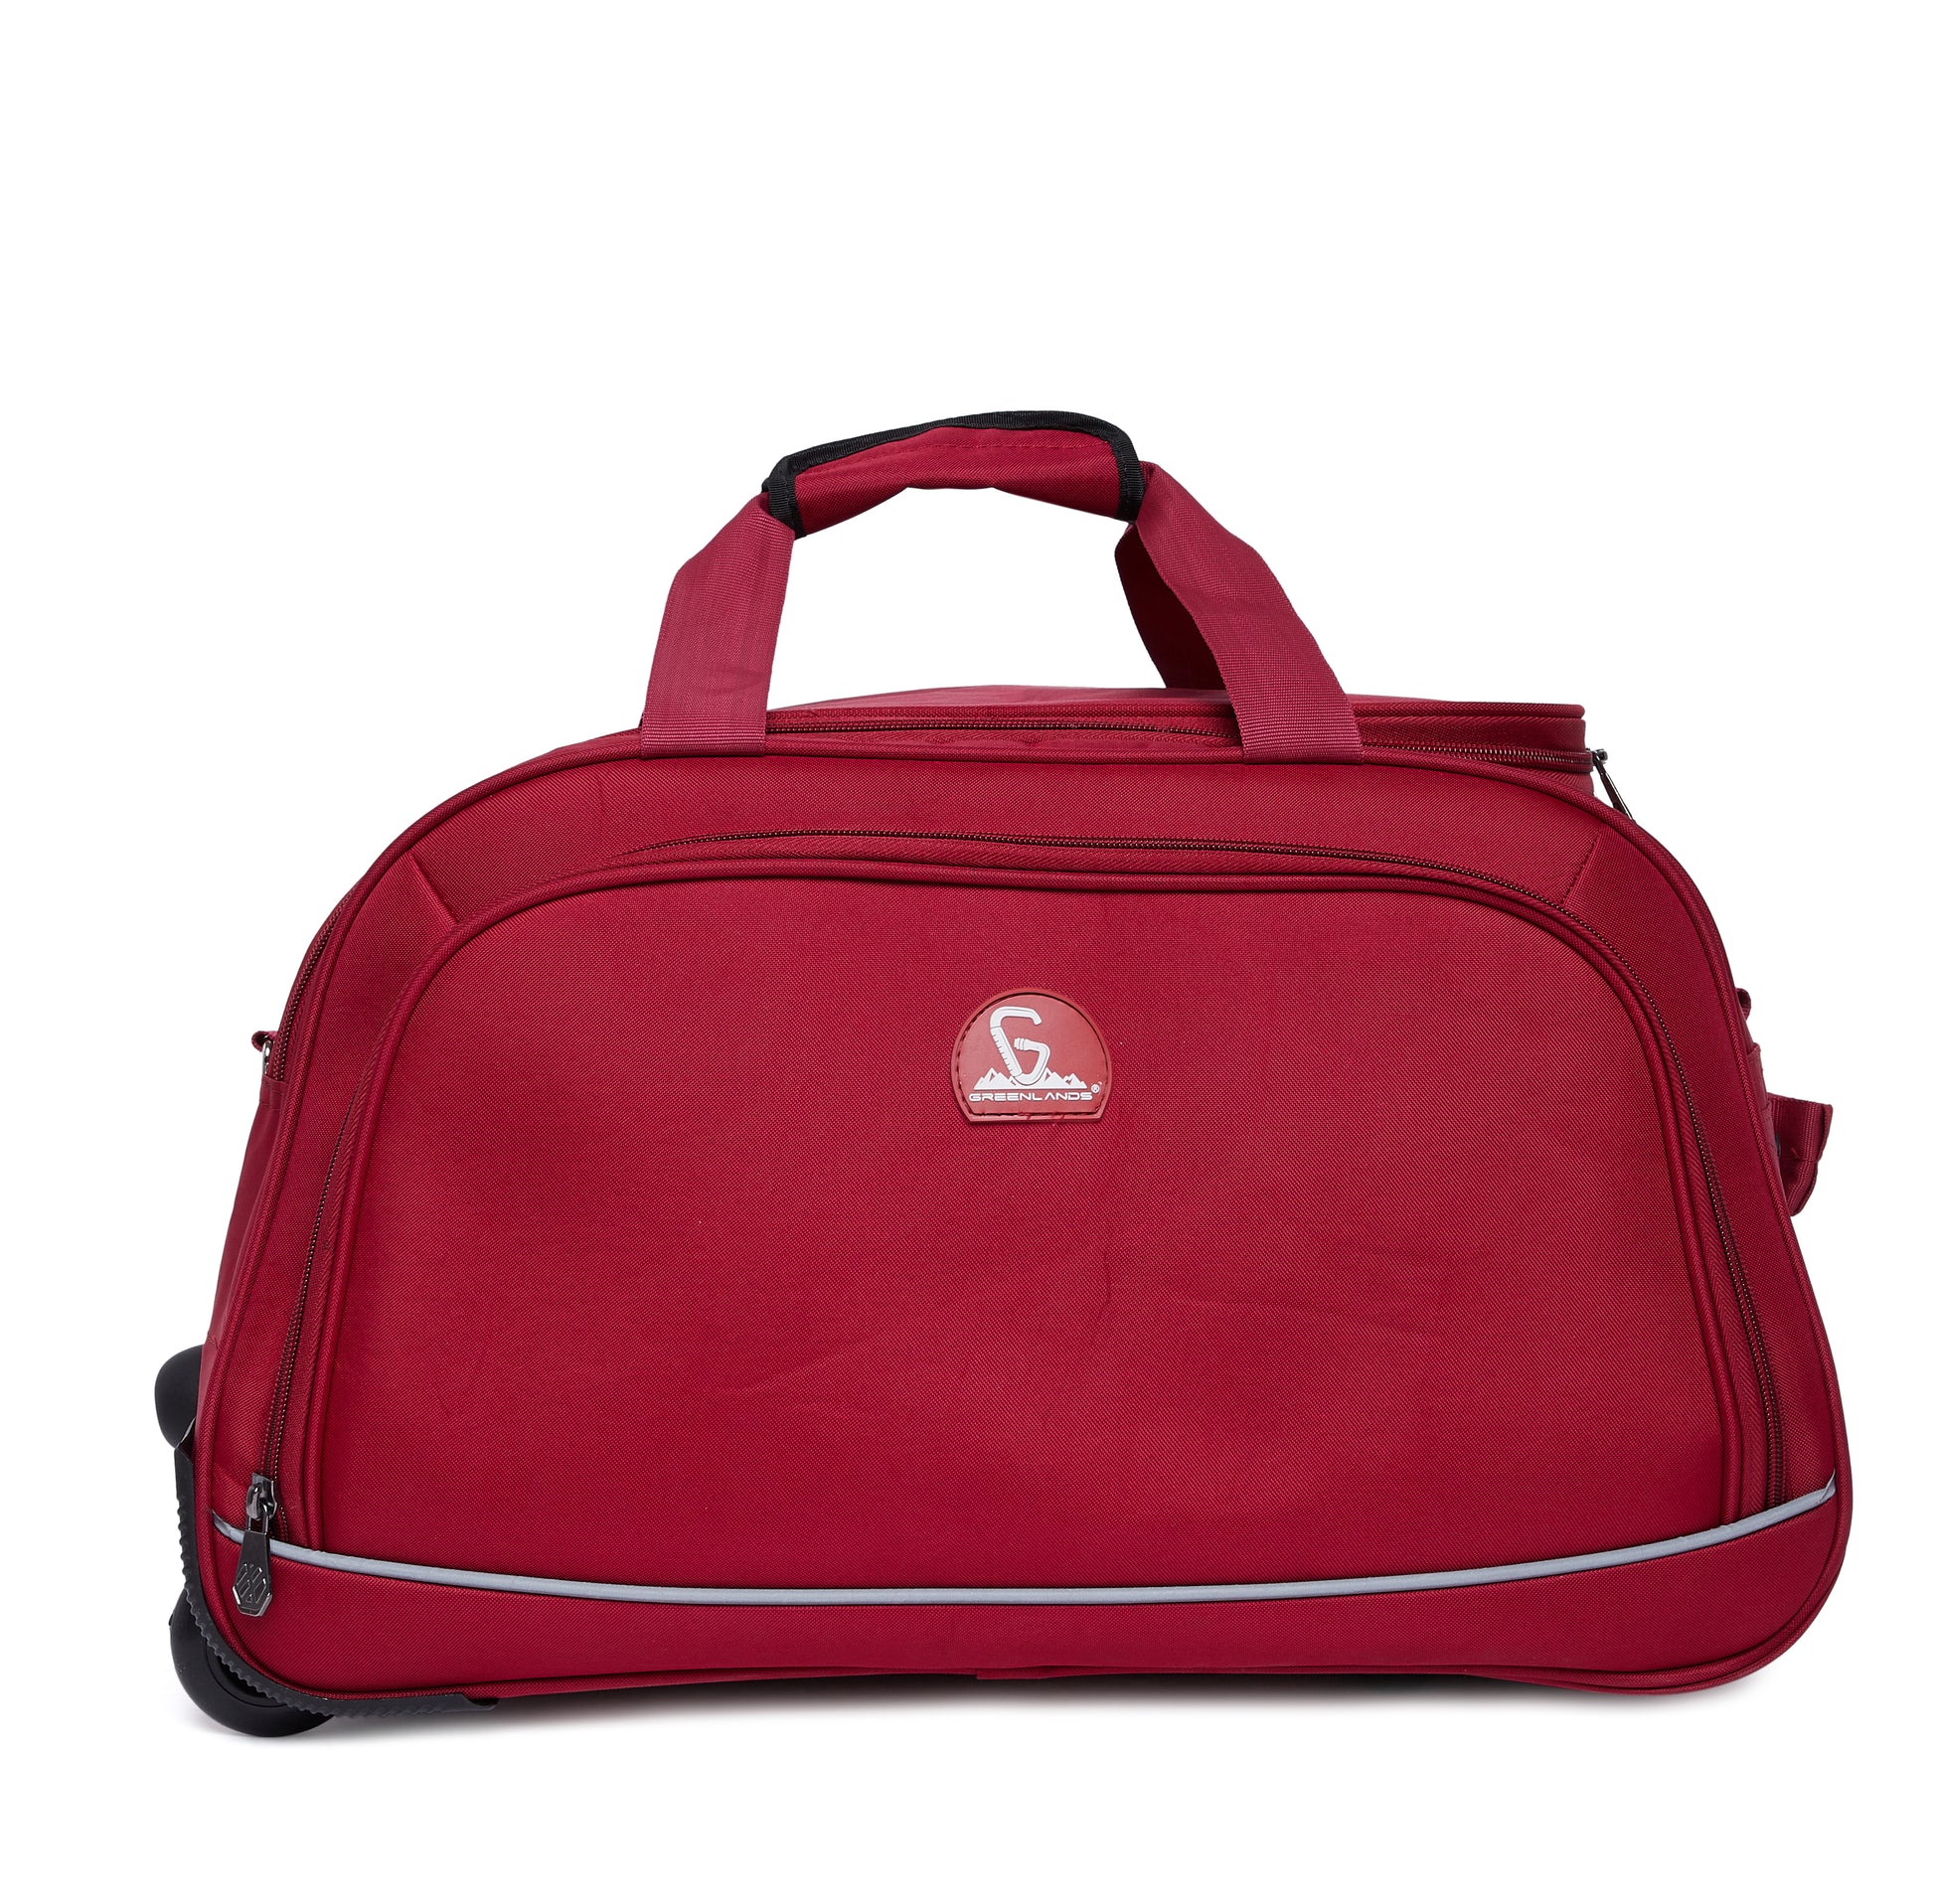 Greenlands Nifty Duffle Bag 45 ltr - Red